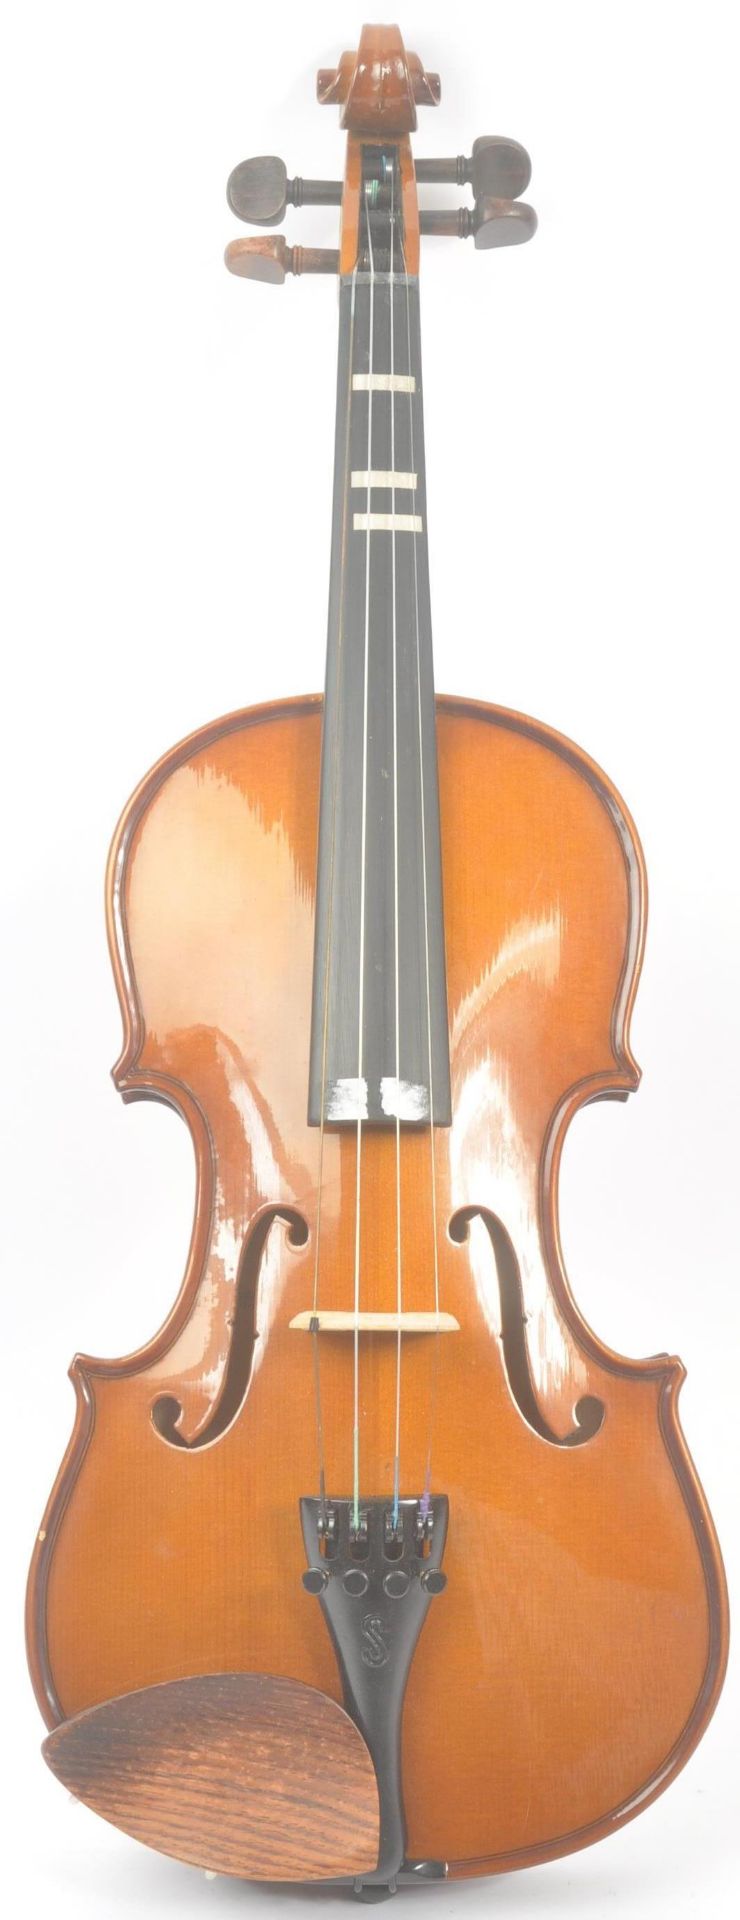 STENTOR - 20TH CENTURY 3/4 STUDENT I VIOLIN W/ BOW AND CASE - Image 2 of 7